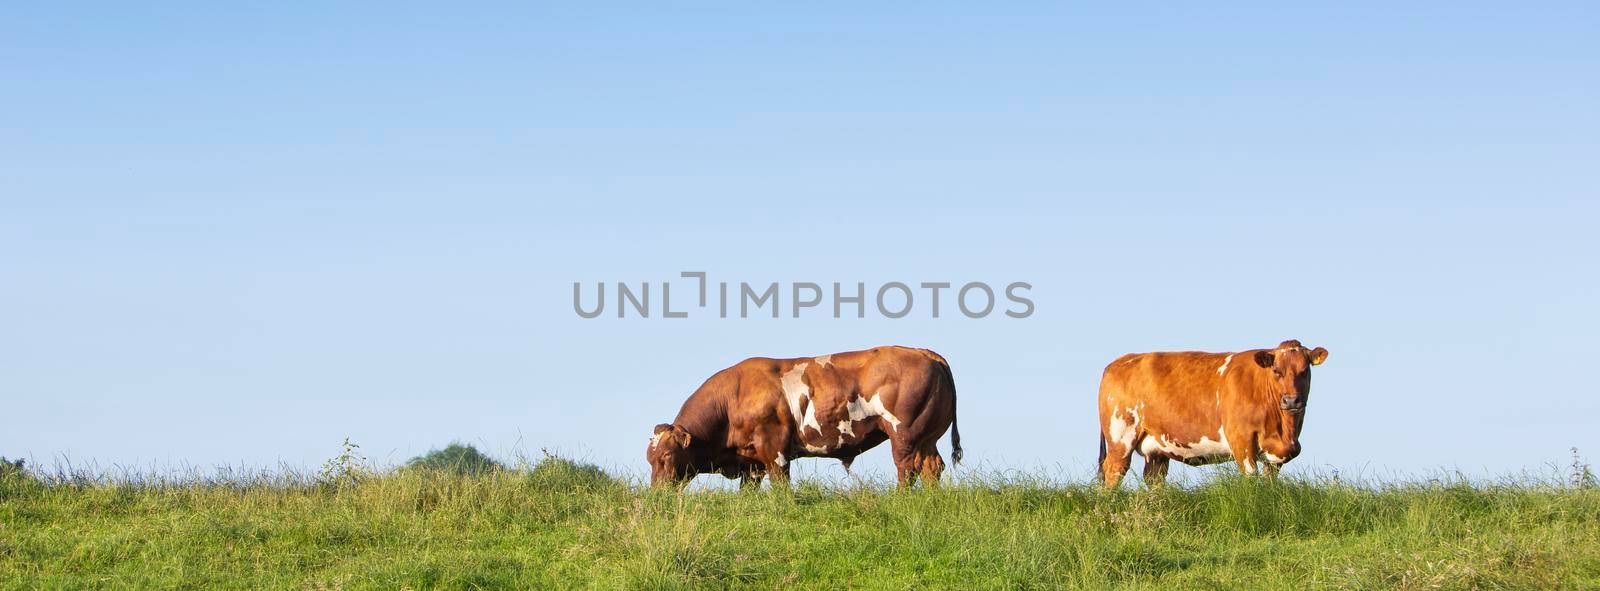 broen spotted bull and cow under blue sky in green grass on dike in holland by ahavelaar